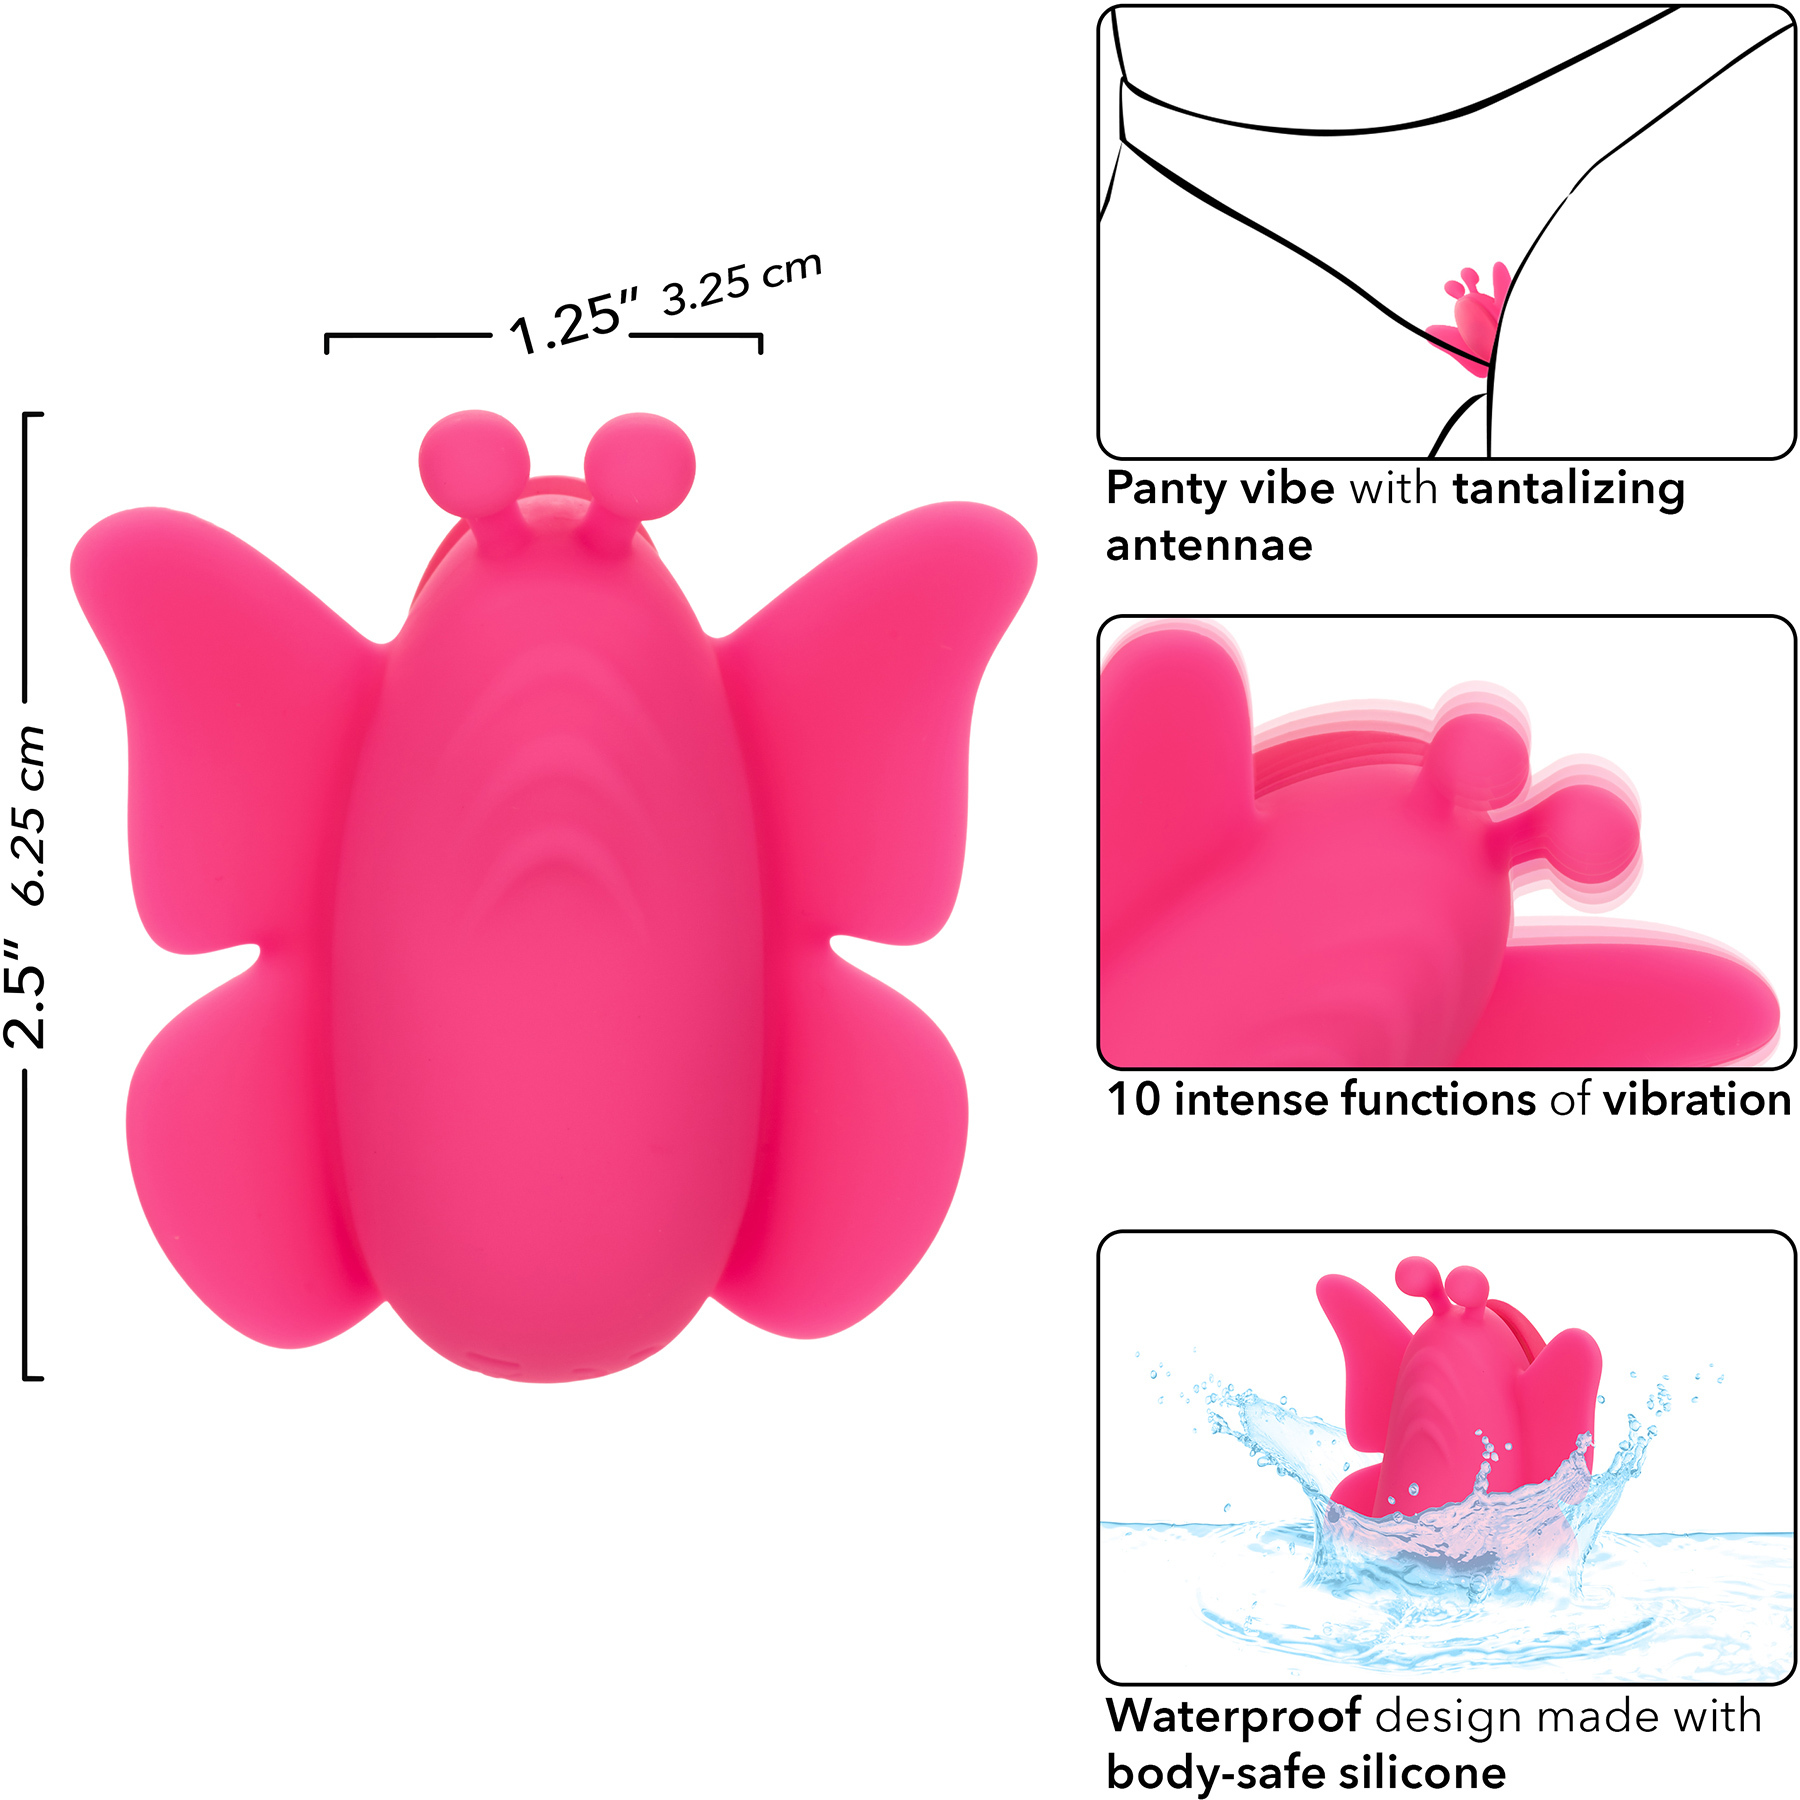 Neon Vibes The Flutter Vibe Rechargeable Waterproof Silicone Magnetic Panty Vibrator - Measurements